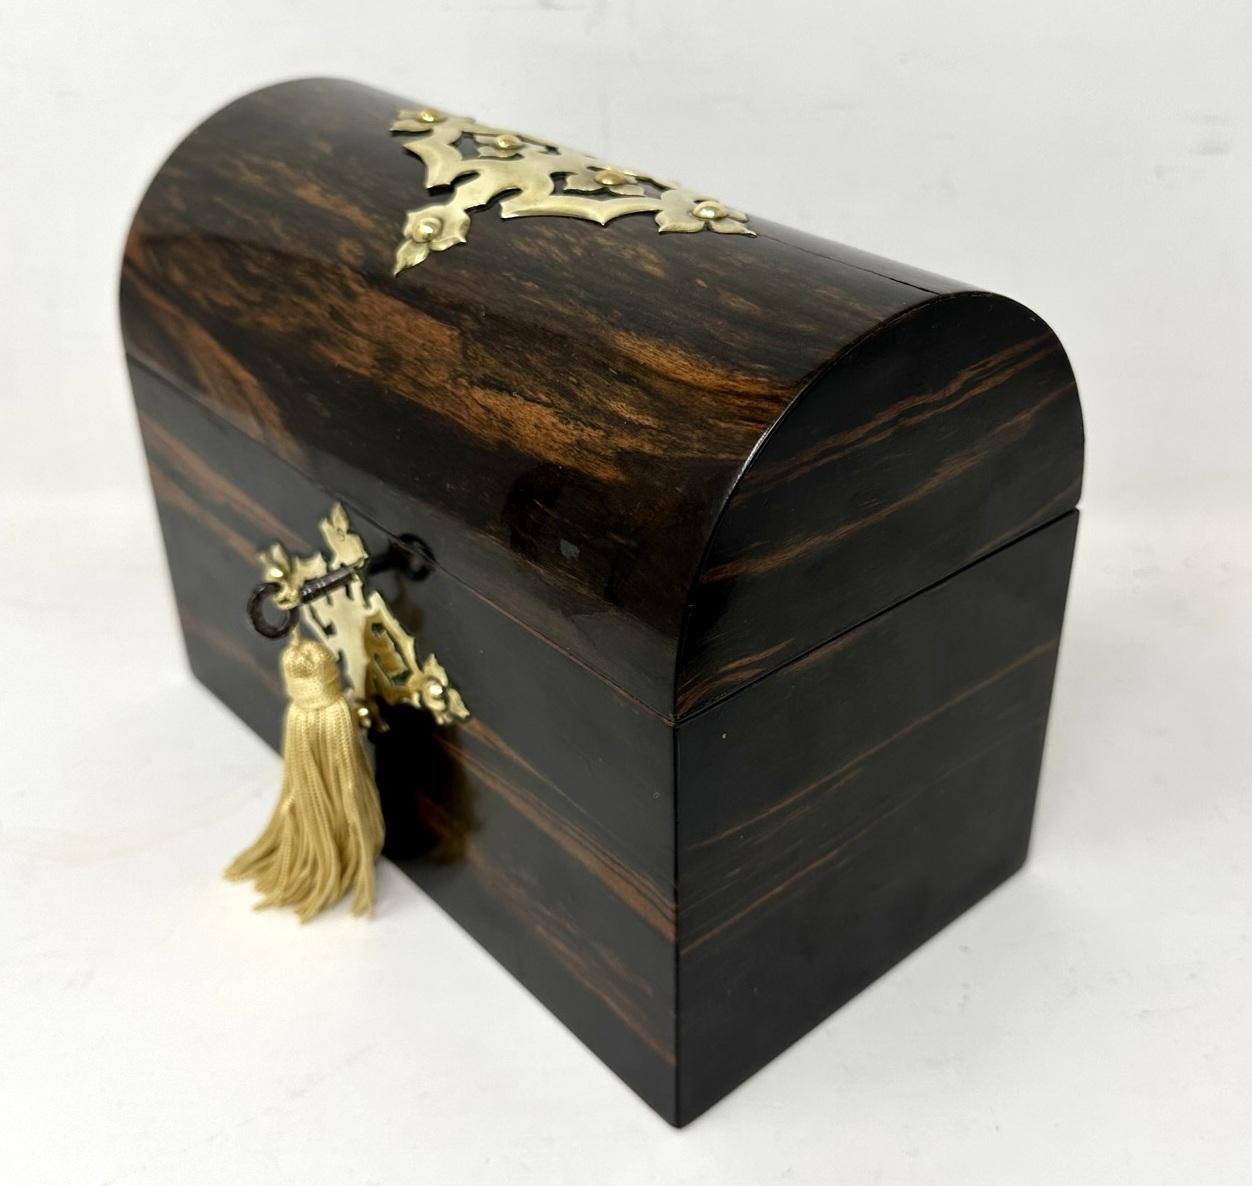 Polished Antique English Coromandel Brass Mounted Wooden Double Tea Caddy 19th Century For Sale